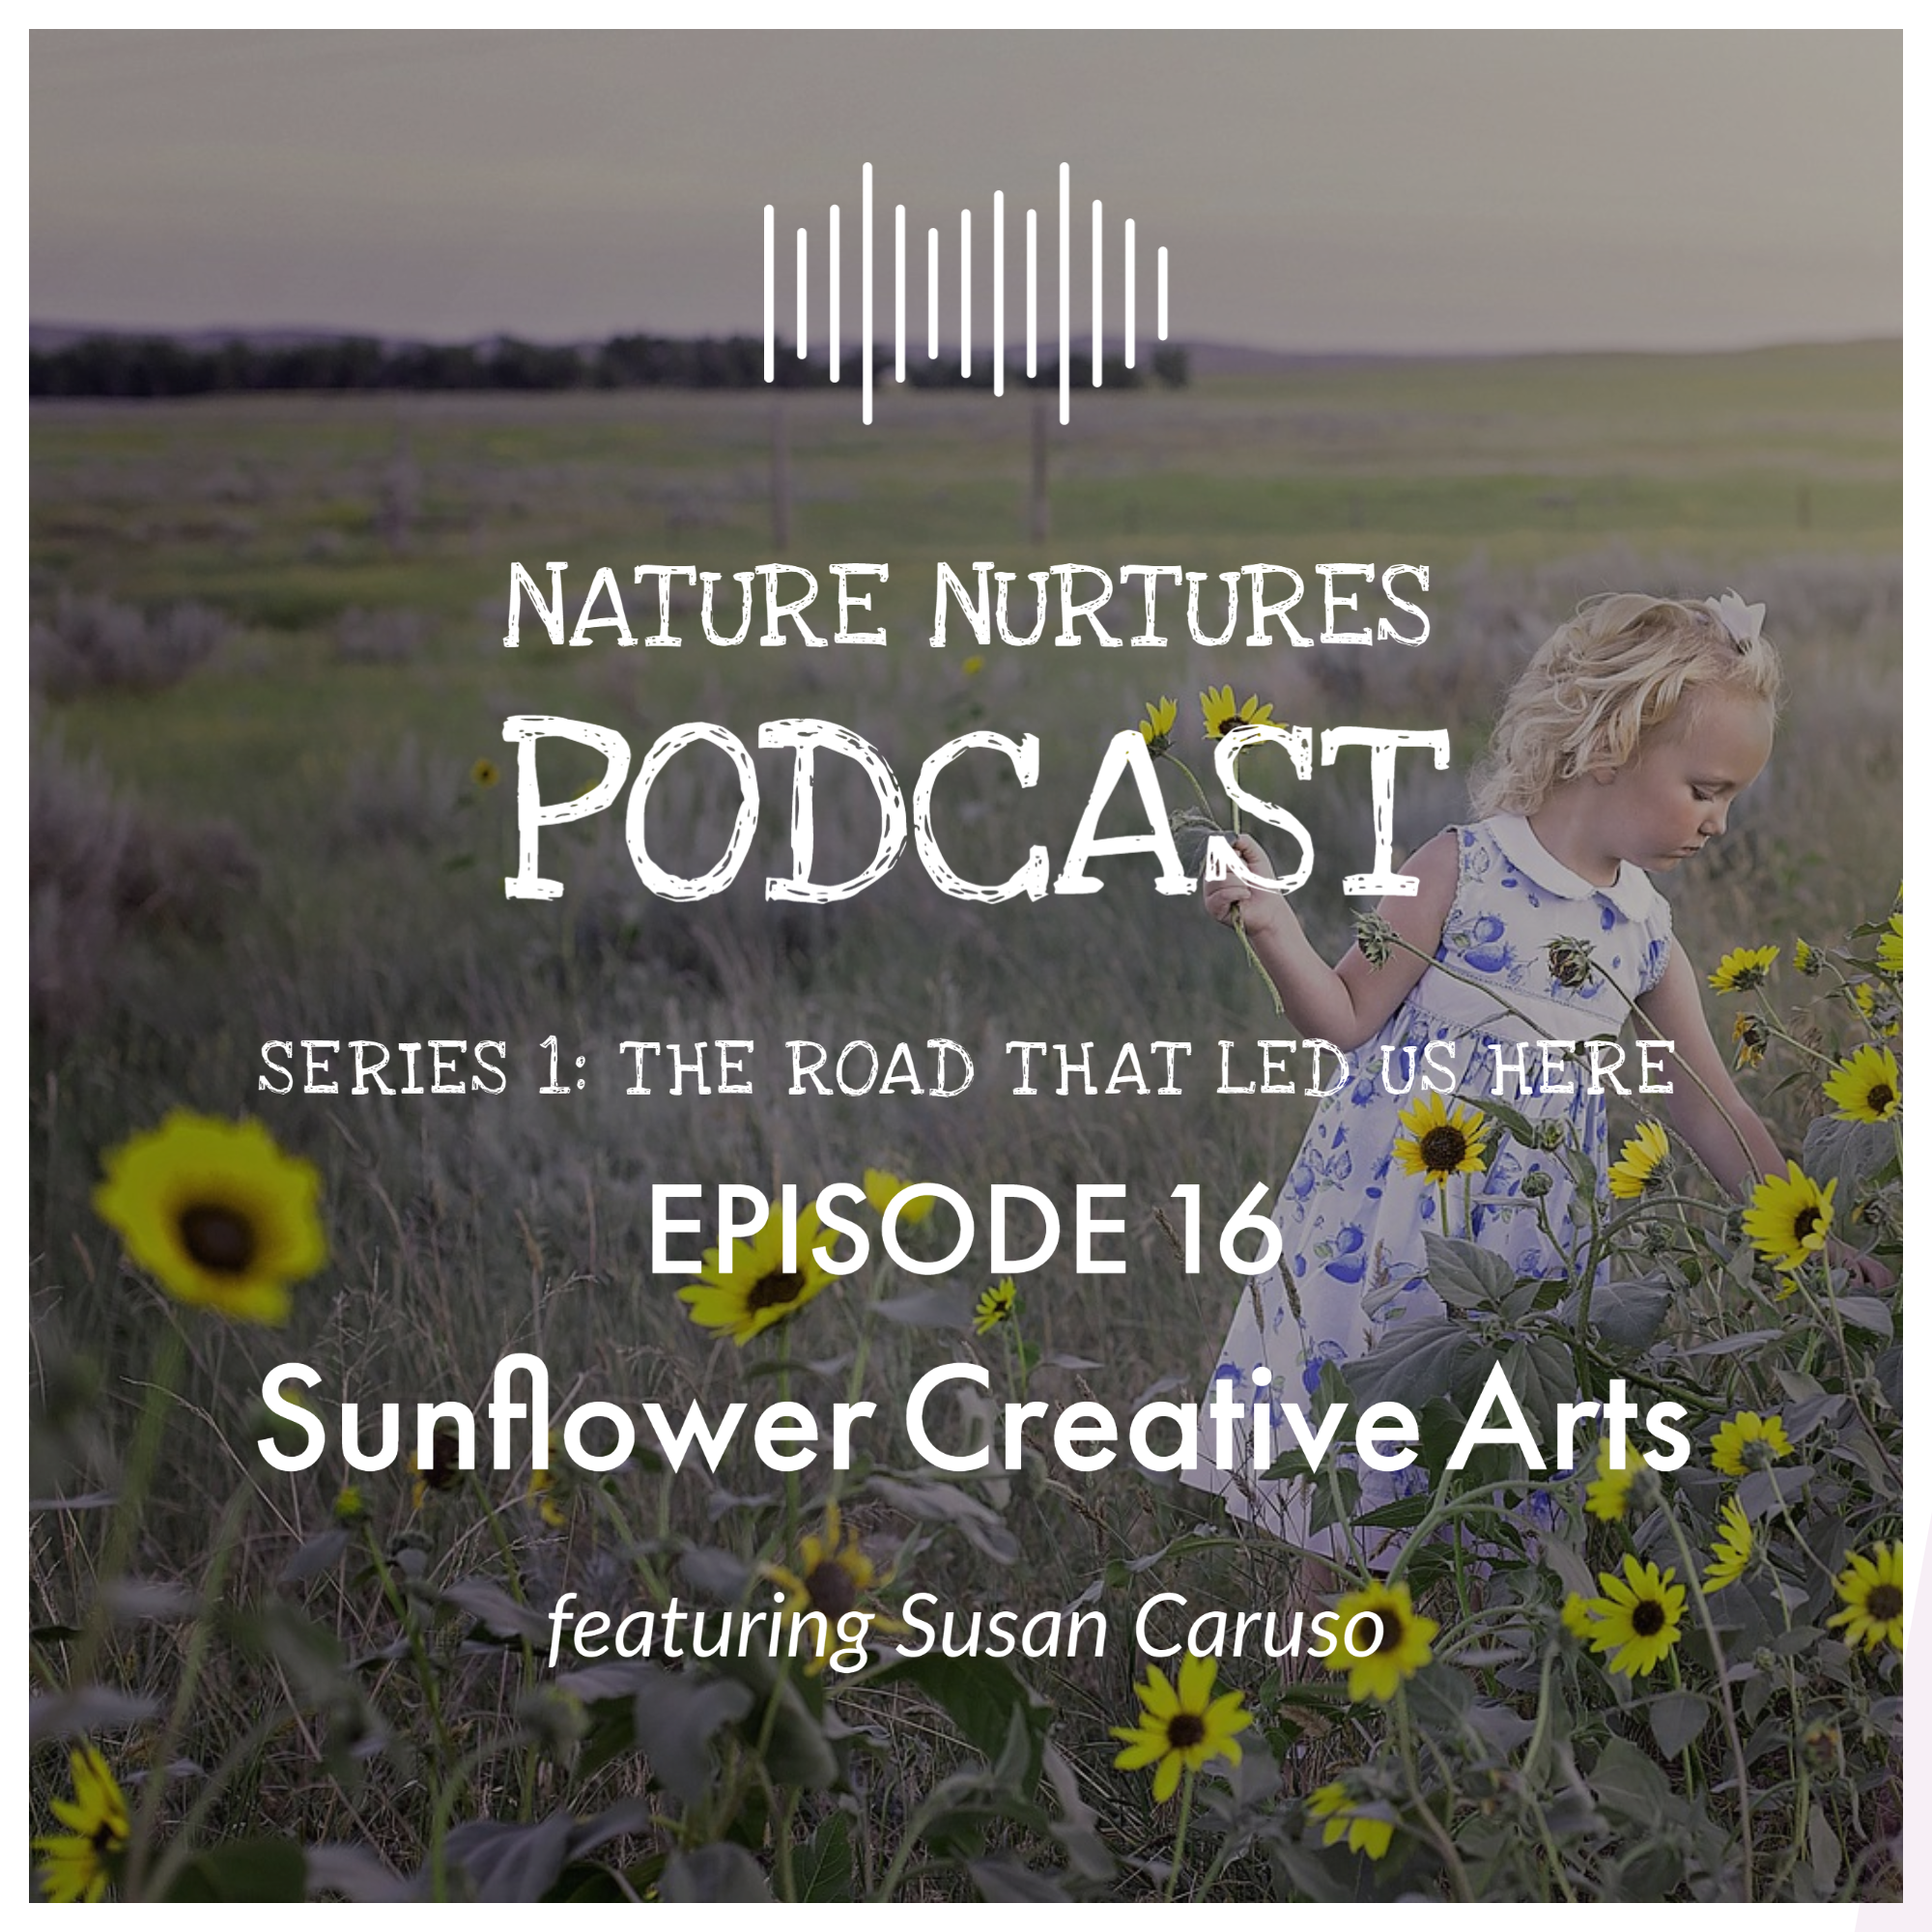 Sunflower Creative Arts, with Susan Caruso Part 1